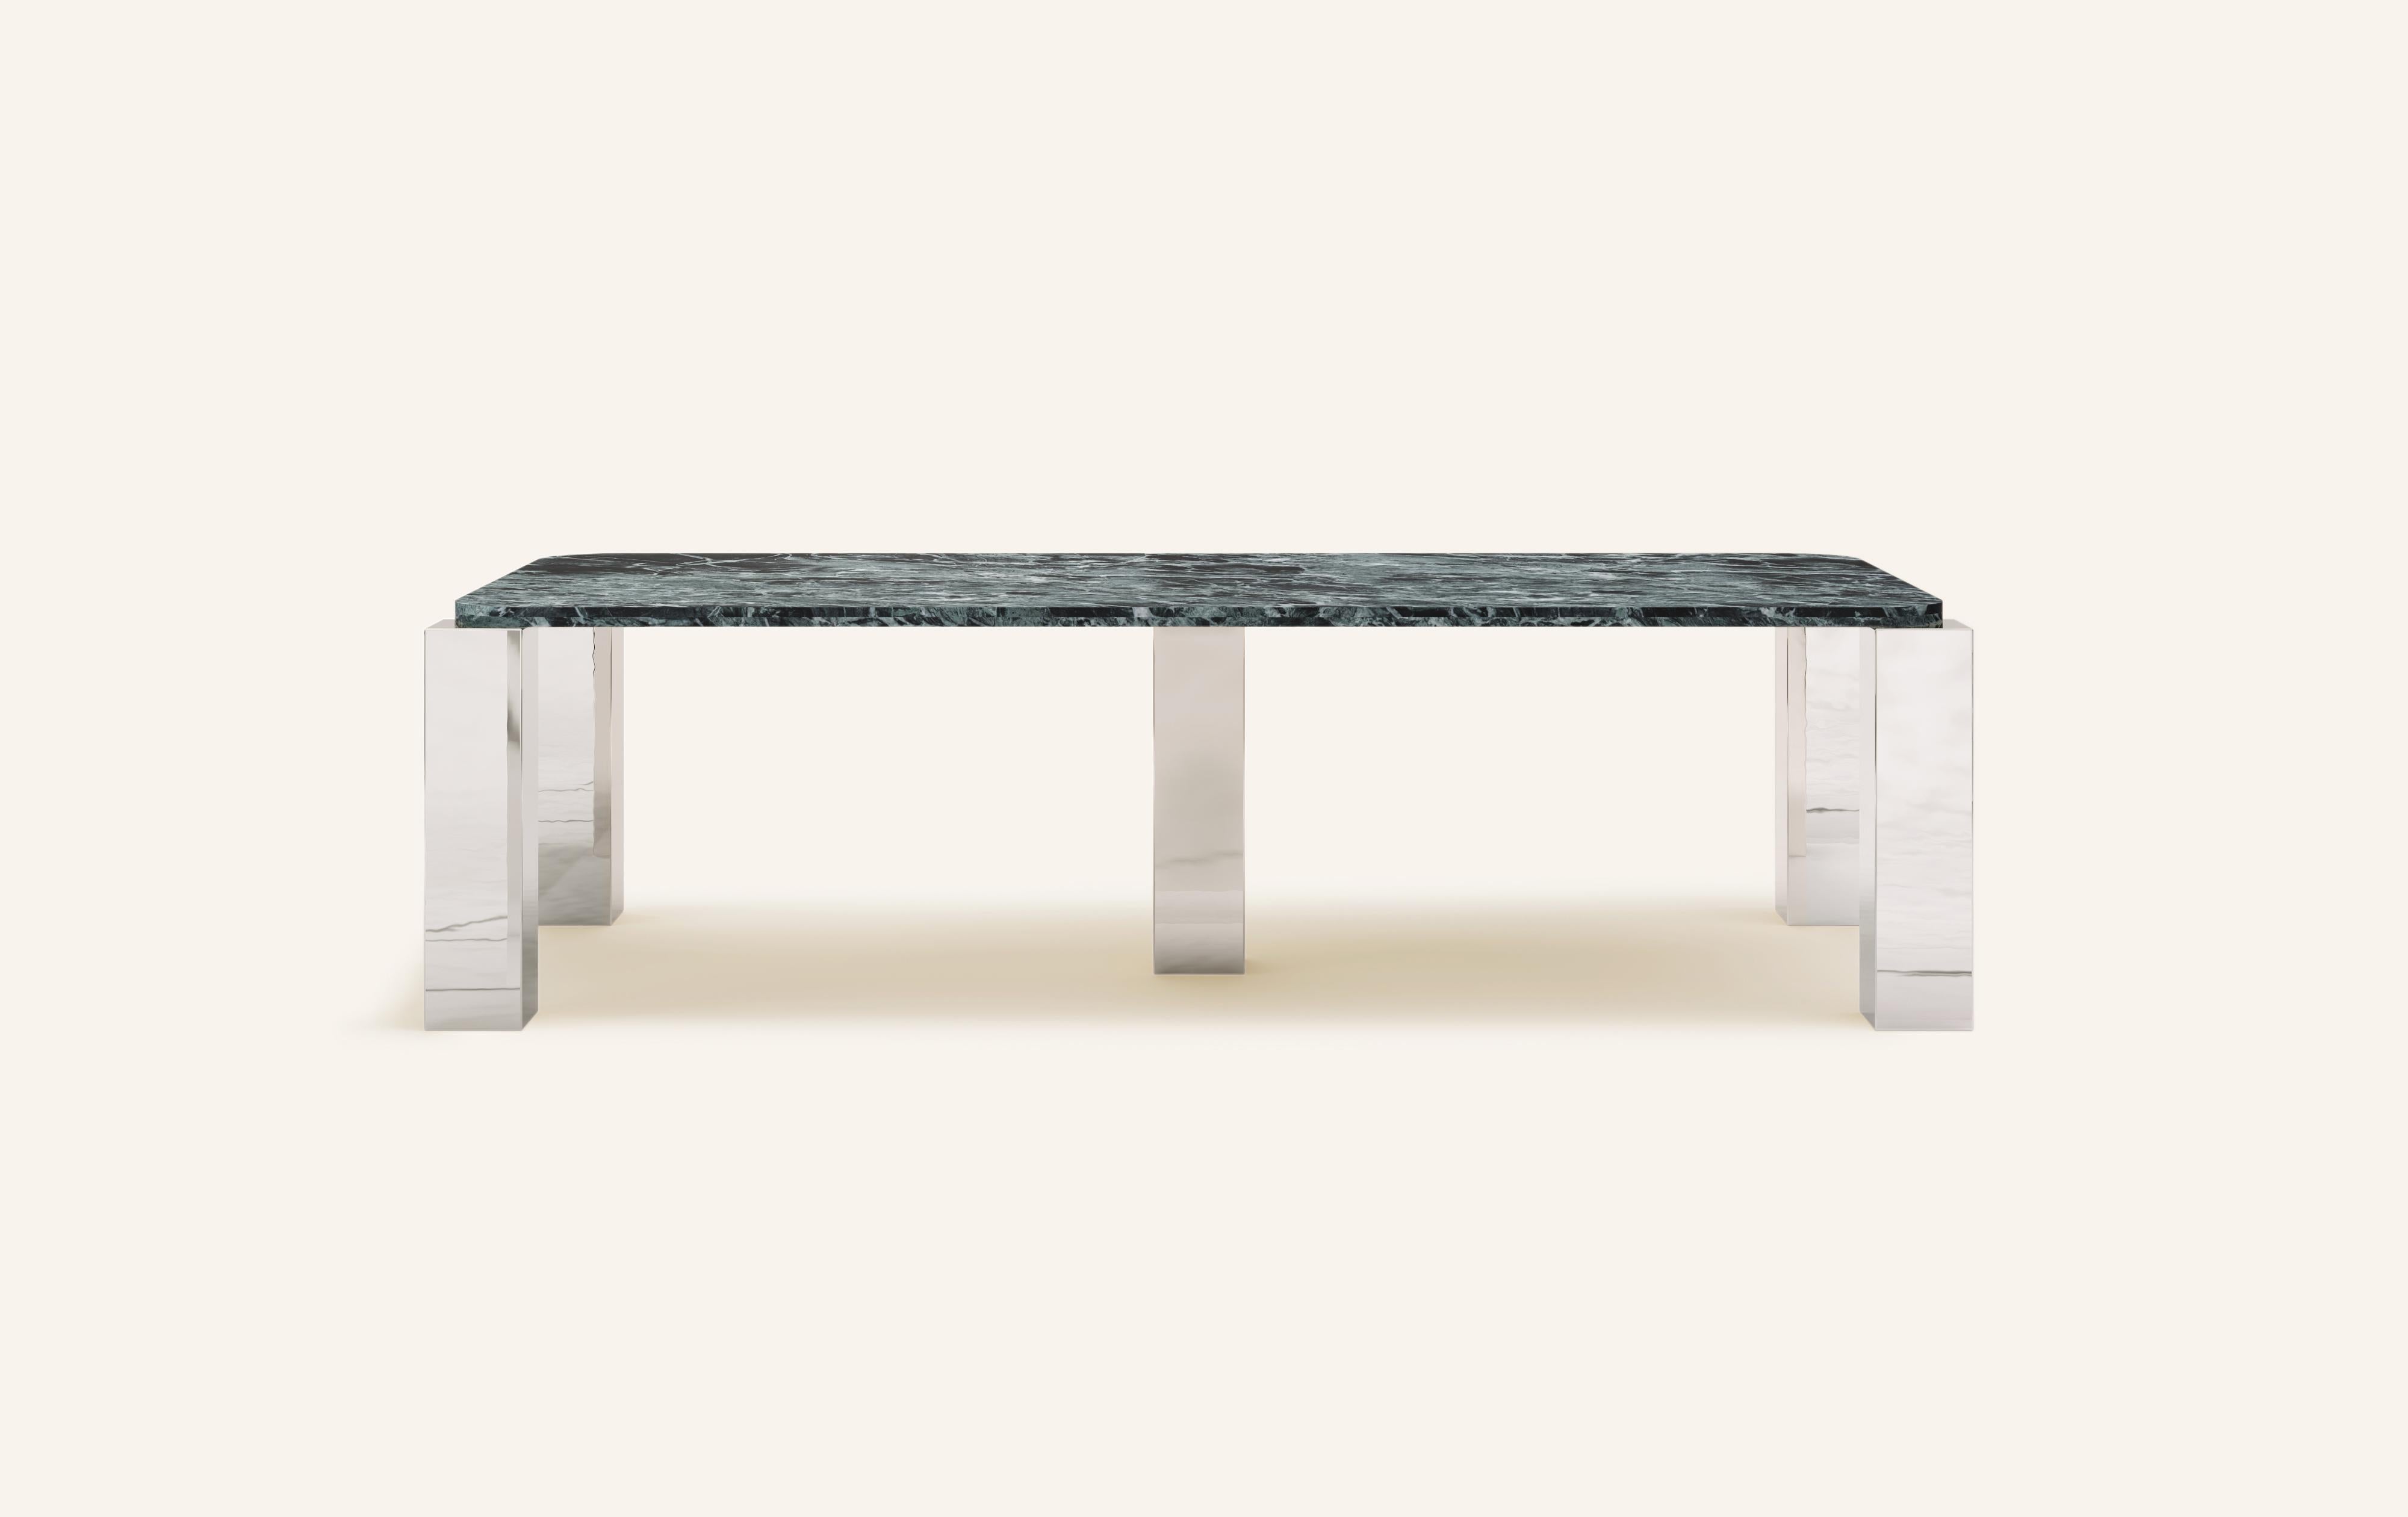 MONOLITHIC FORMS SOFTENED BY GENTLE EDGES. WITH ITS BOLD MARBLE PATTERNS CUBO IS AS VERSATILE AS IT IS STRIKING.

DIMENSIONS:
120”L x 50”W x 30”H: 
- 118”L x 48”W x 1.5” THICK TABLETOP WITH WITH 6